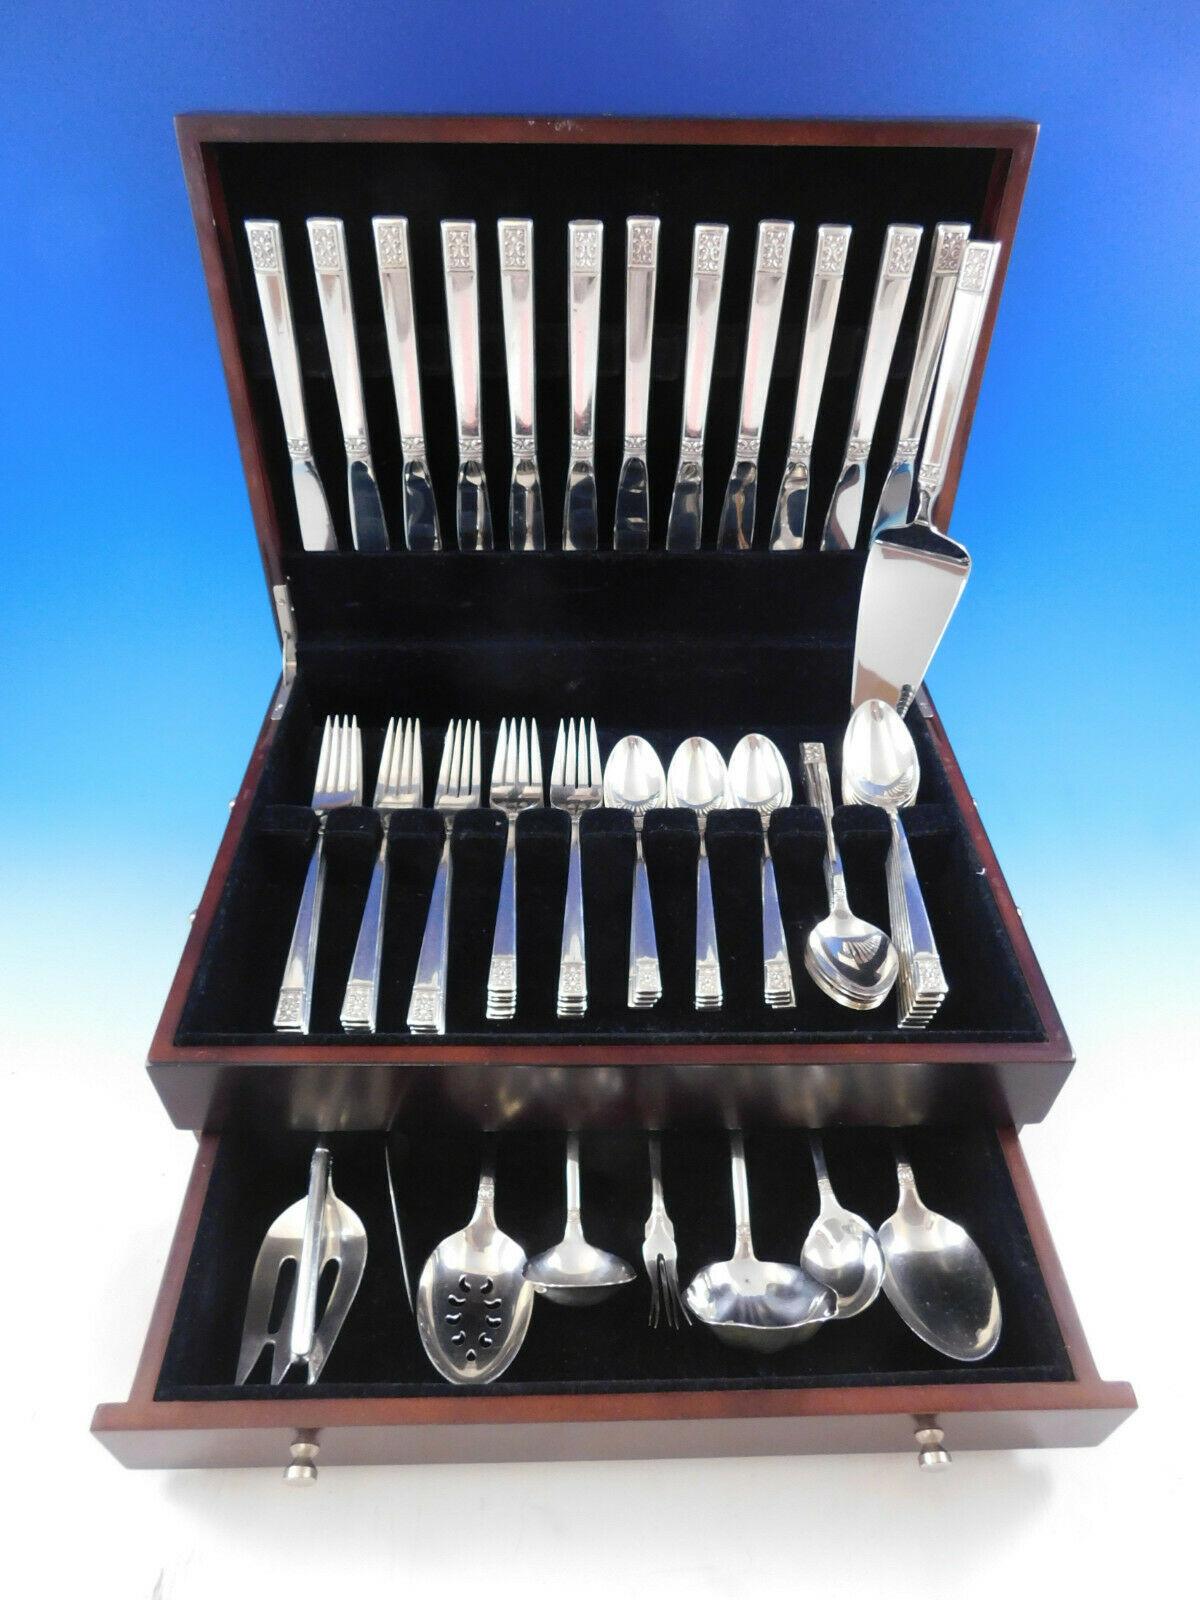 Heirloom quality Laureate by Towle sterling silver flatware set - 71 pieces, circa 1968. This set includes:

12 knives, 8 7/8